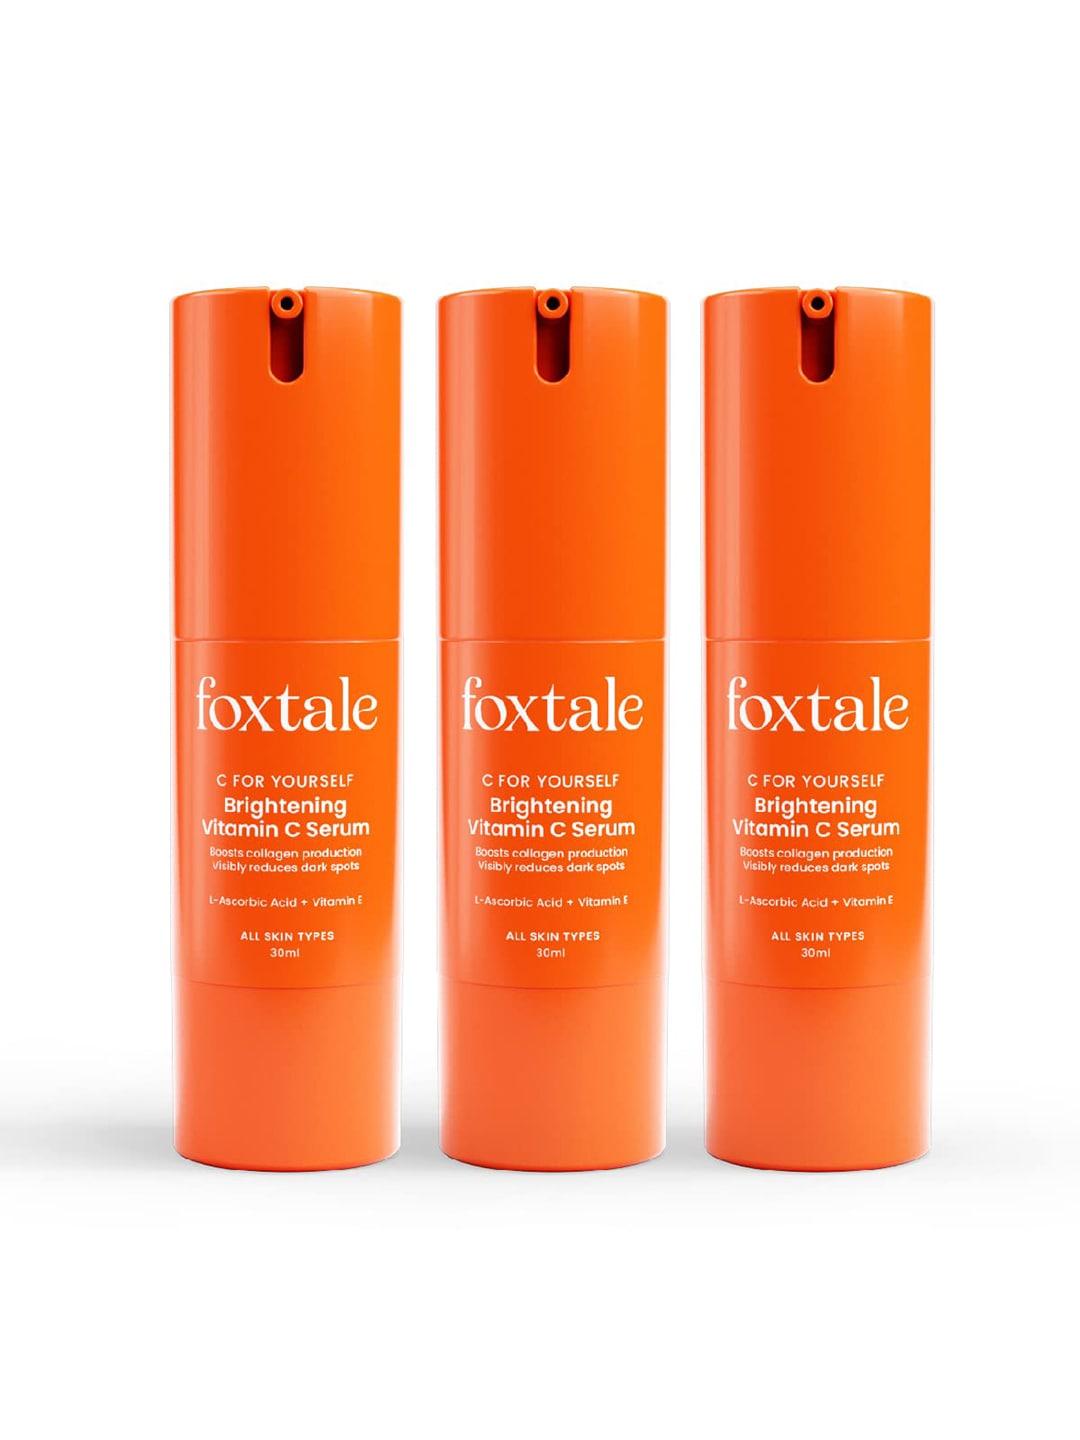 FoxTale Set Of 3 C for Yourself Vitamin C Face Serum - 30 ml Each